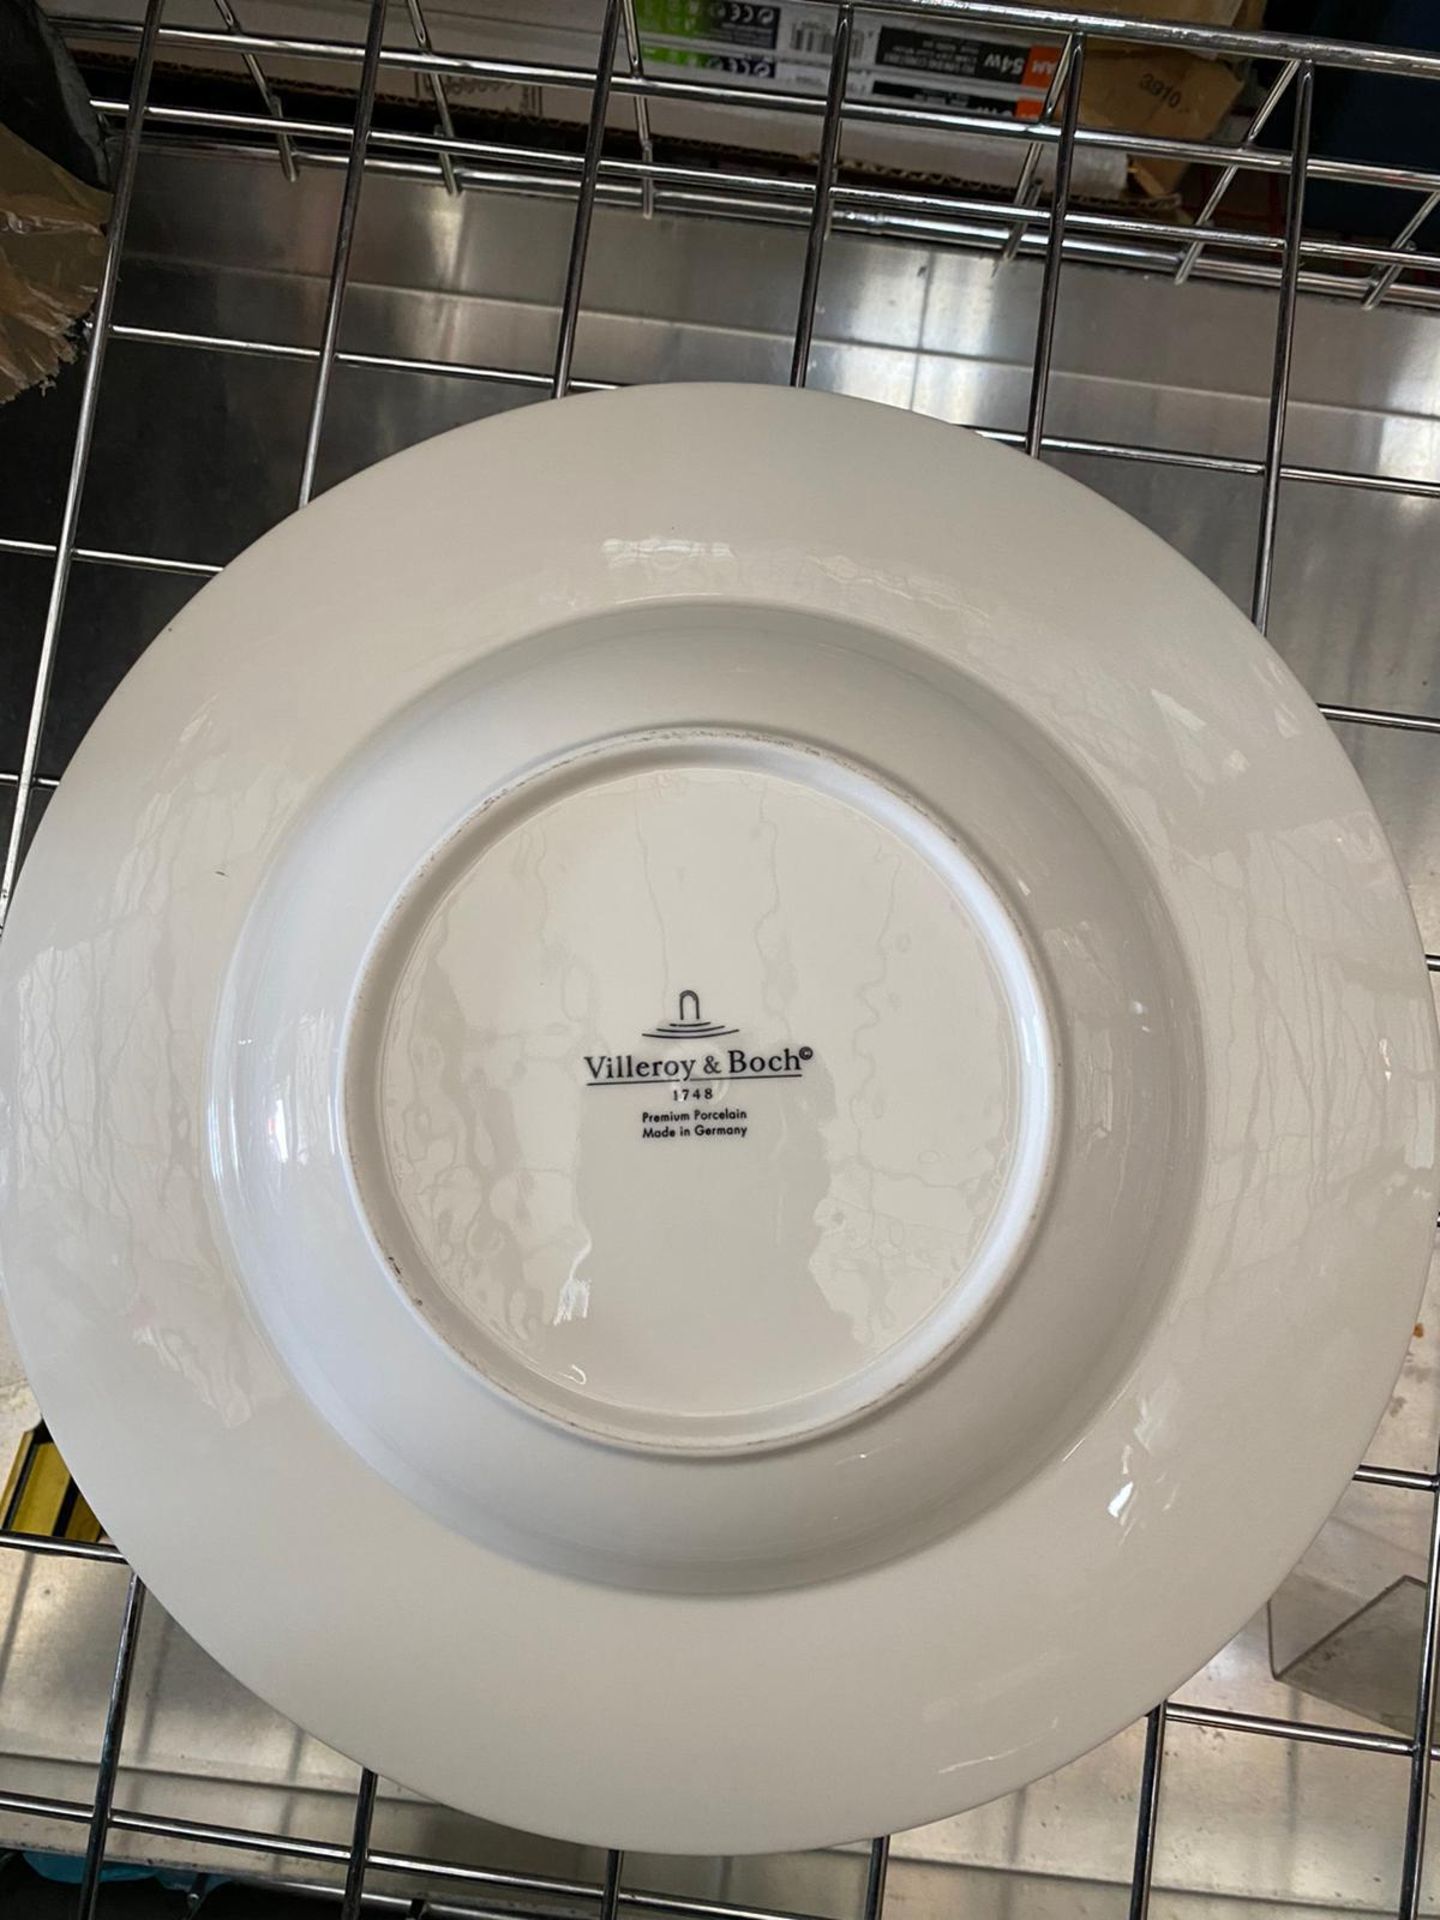 6 x Villeroy & Boch Royal Dinner Plate -290mm (29cm) - Ref: 1044122620 - New and boxed - CL011 - - Image 4 of 5